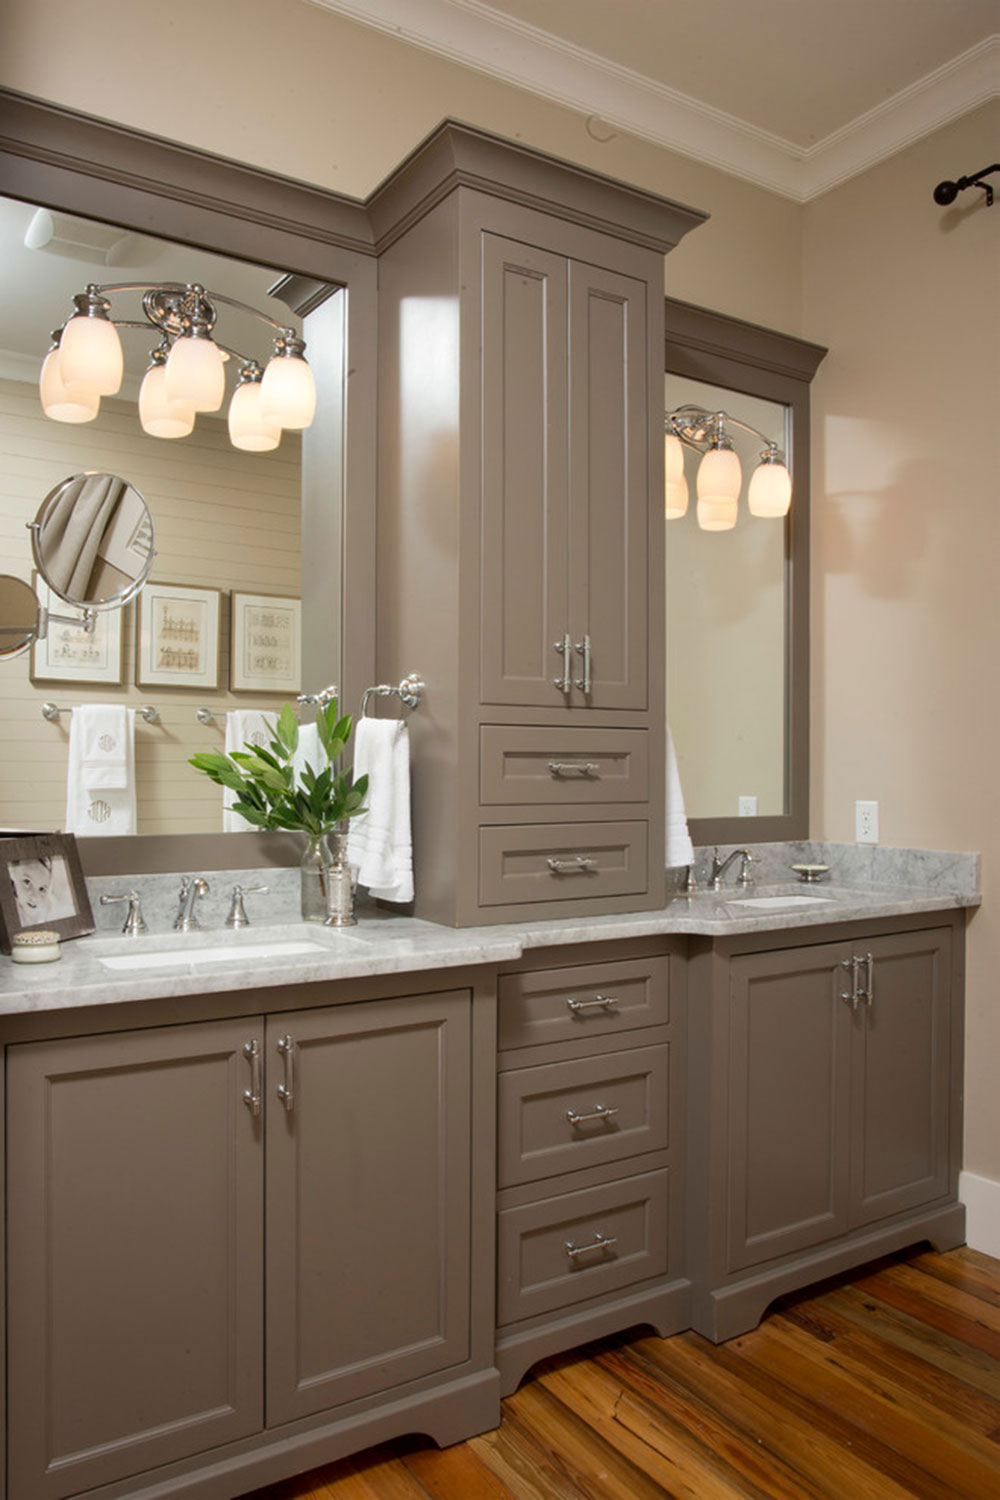 Hampton-Hall-Farnsleigh-by-Court-Atkins-Group Small bathroom remodel tips to do it properly